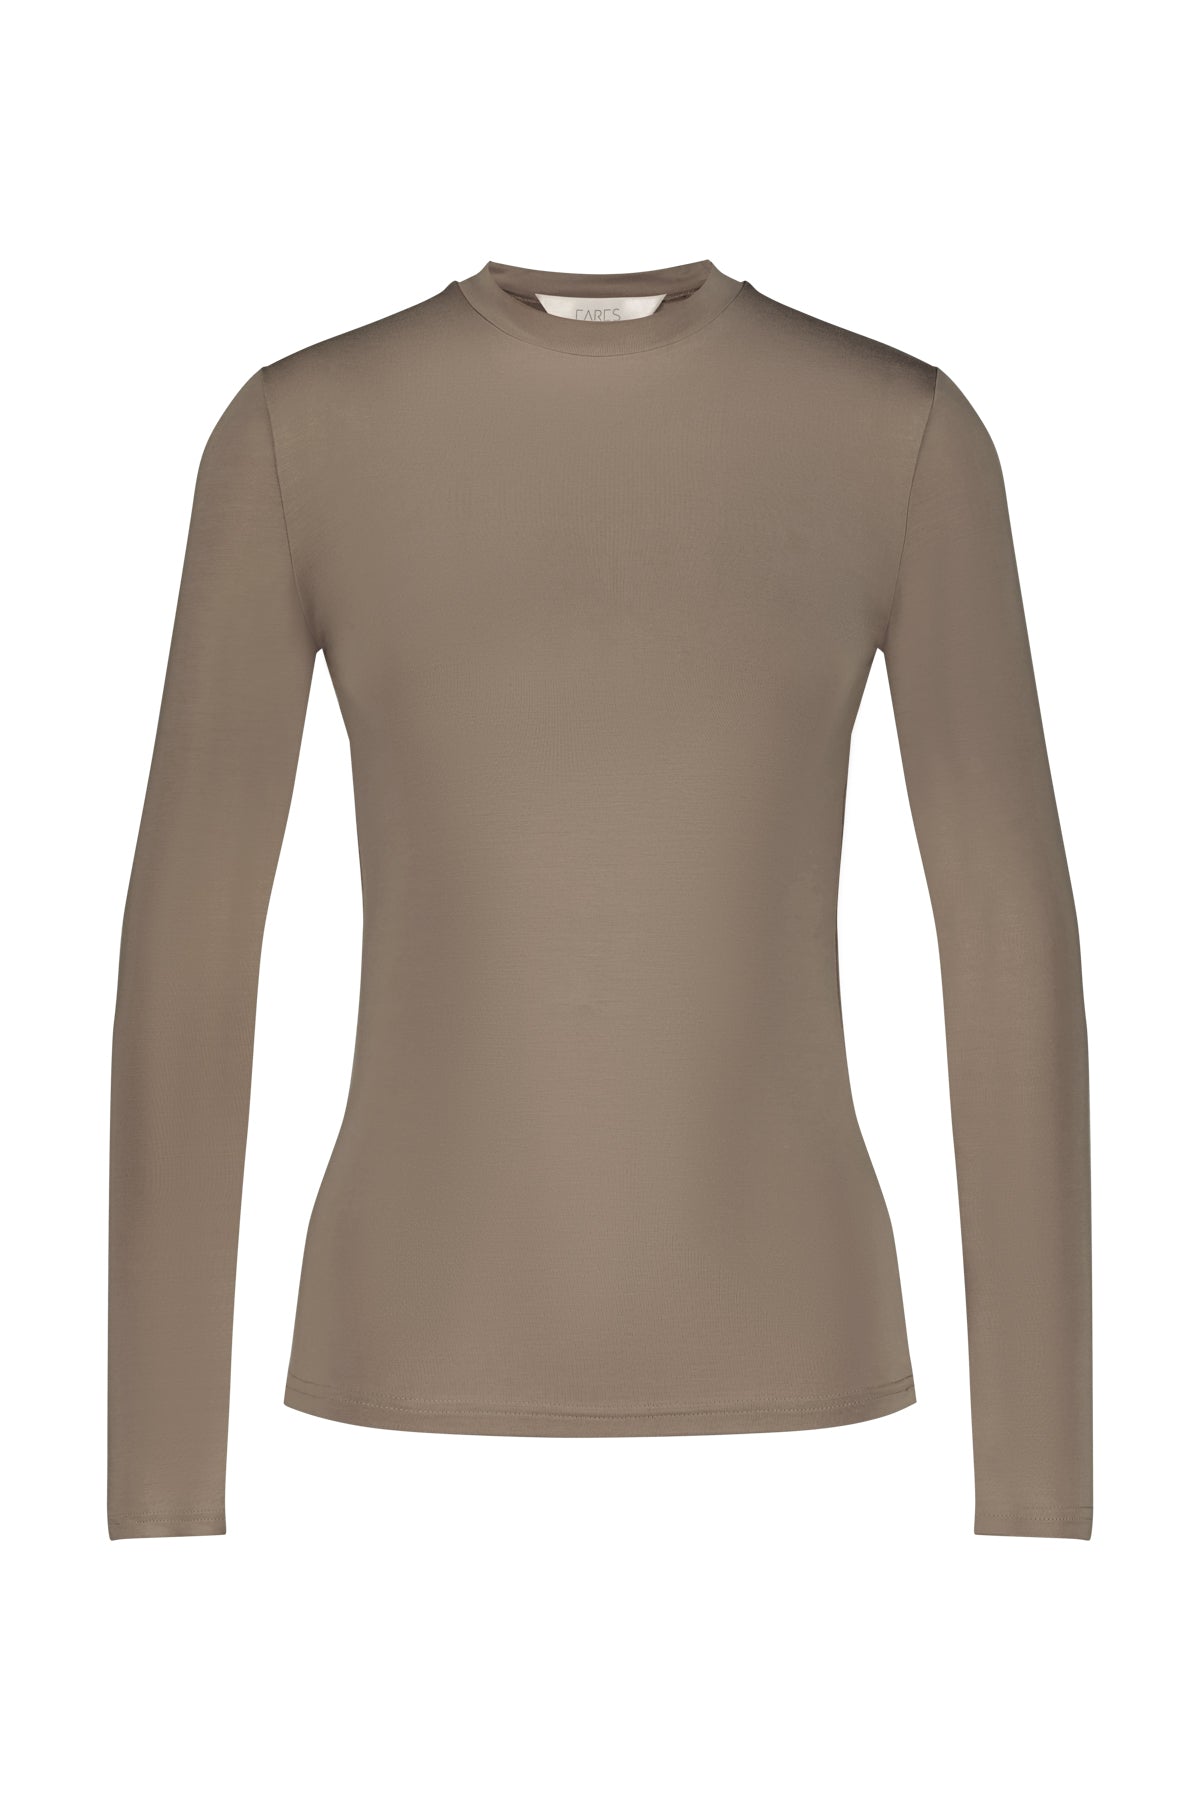 CA - Long Sleeve Layer - Taupe